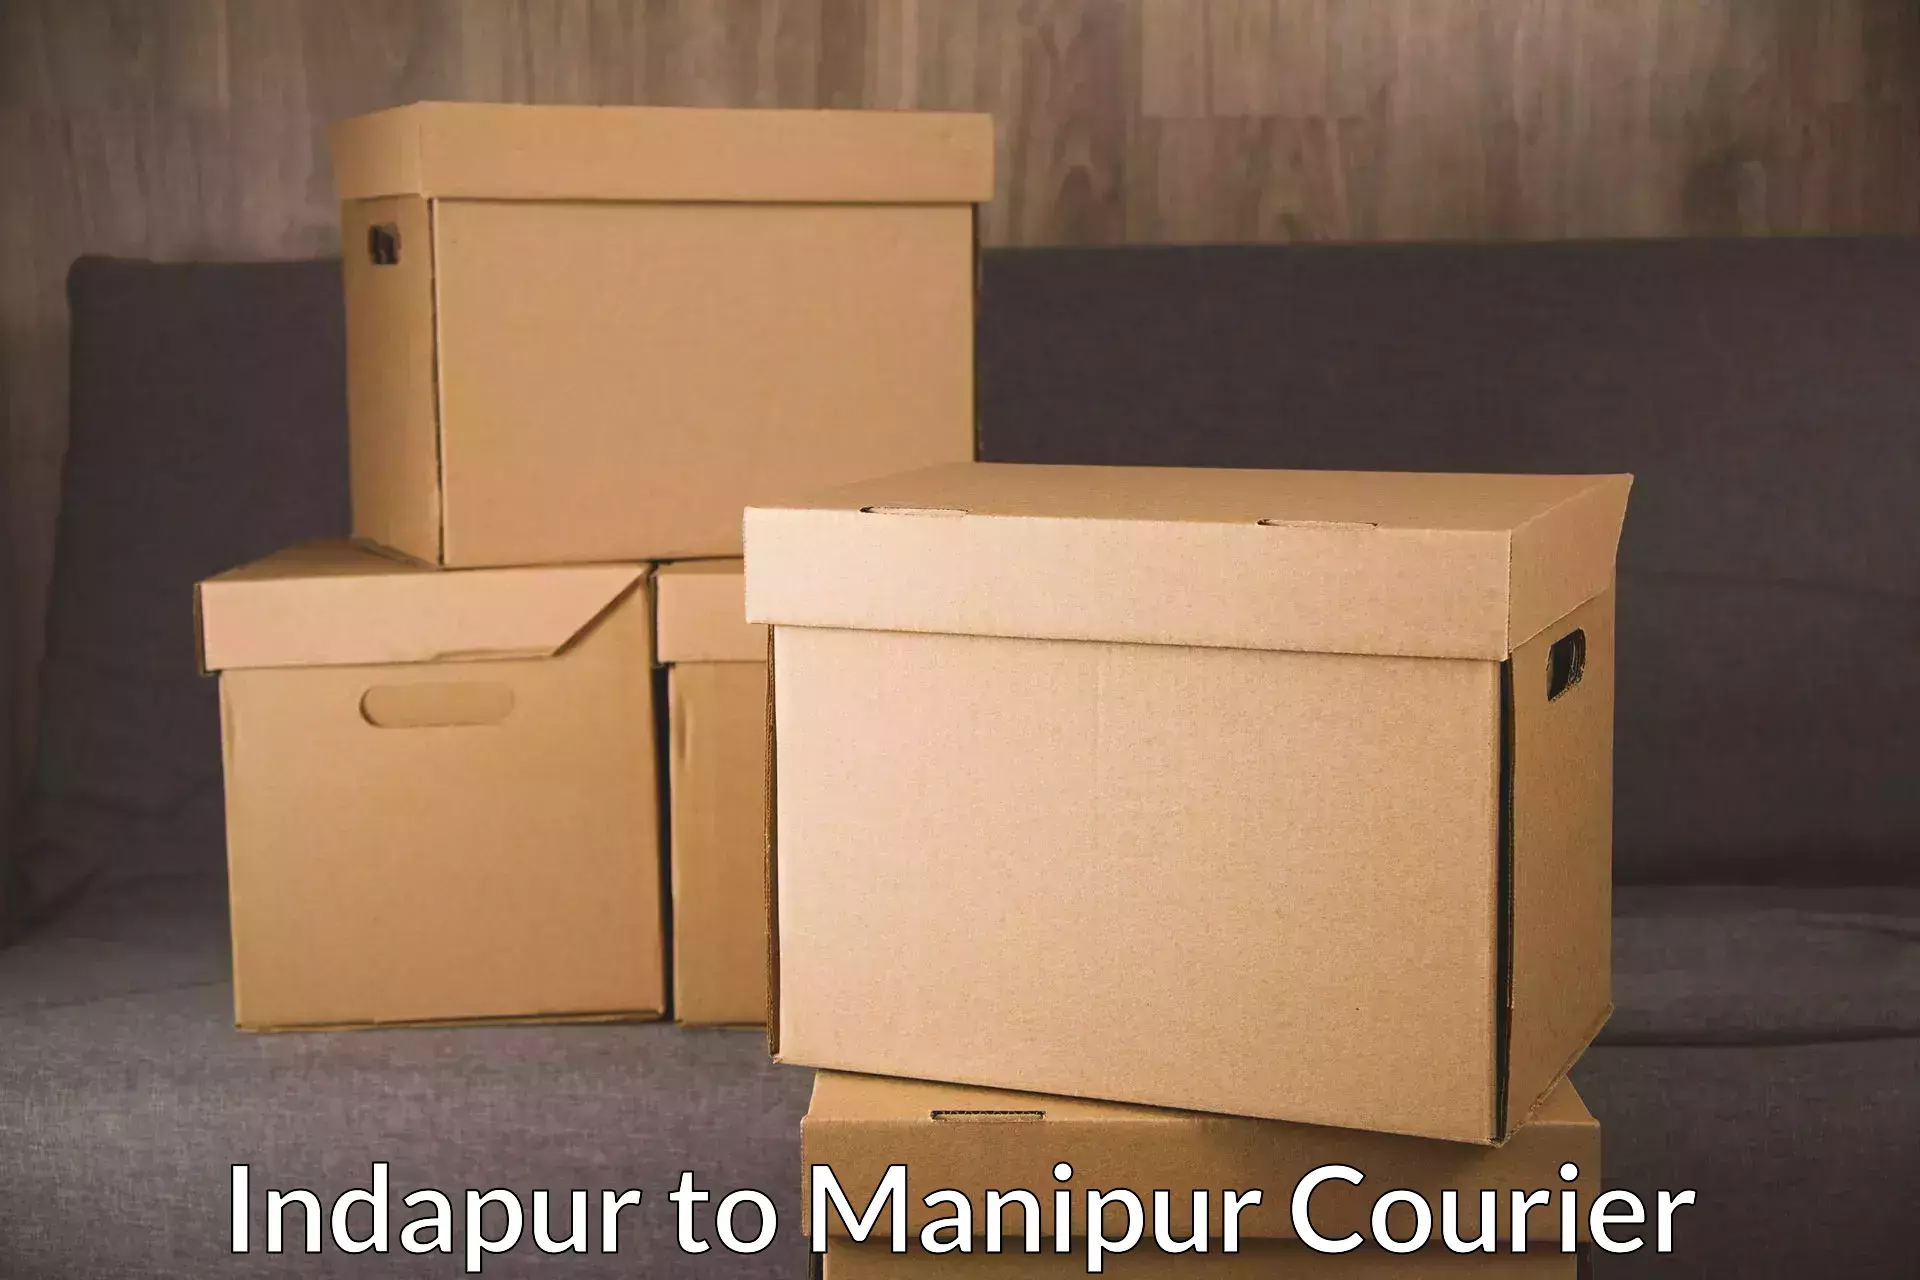 On-call courier service Indapur to Manipur